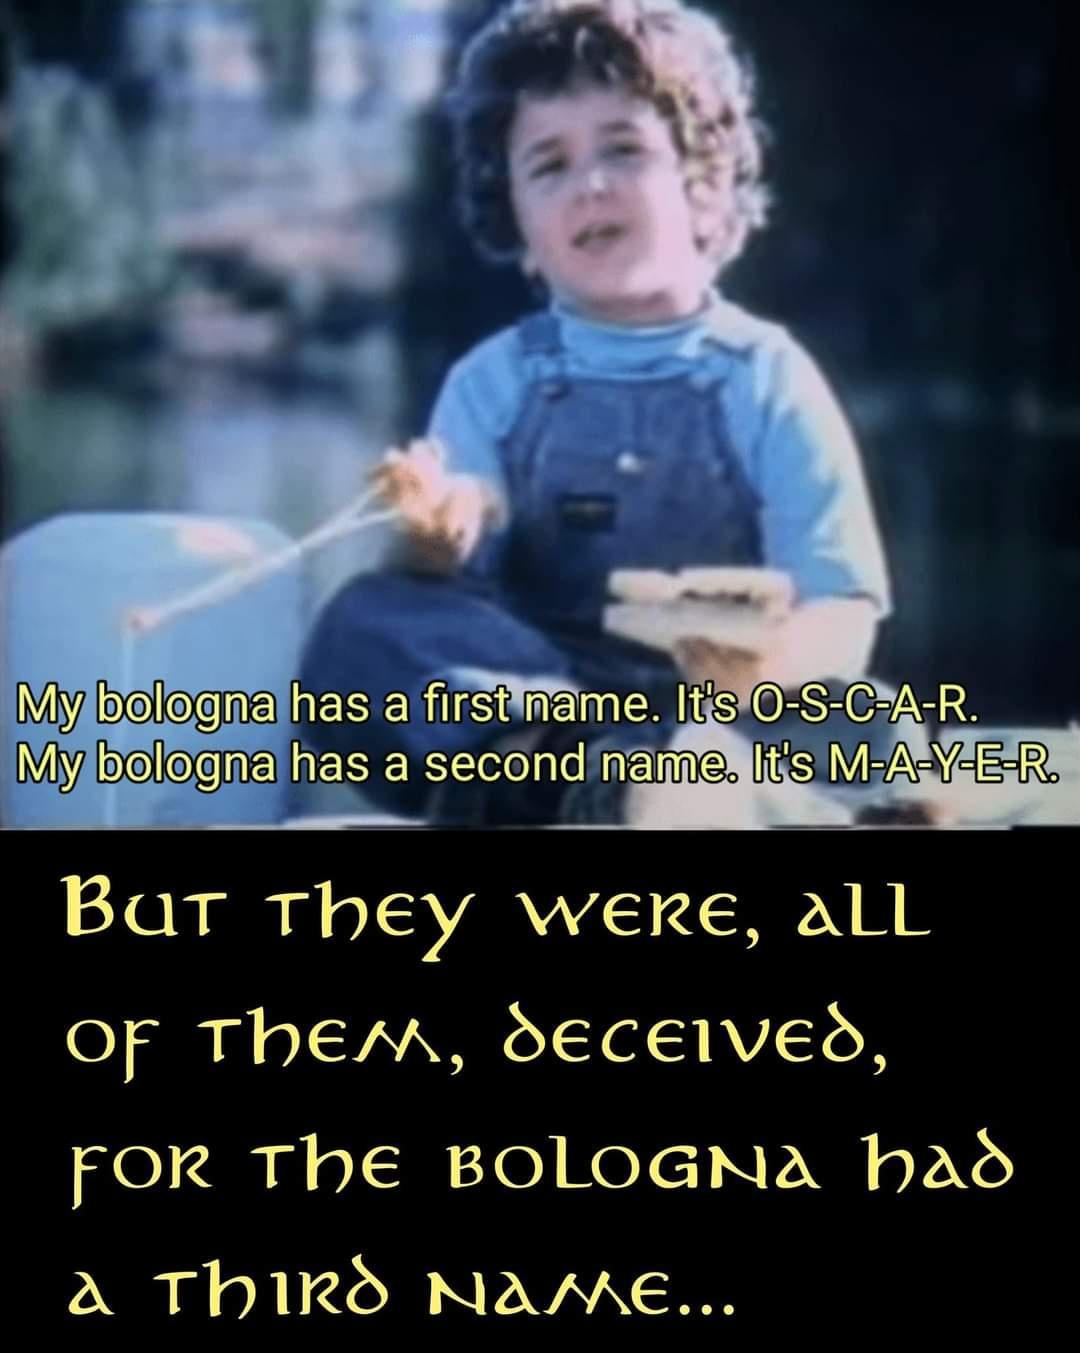 dank memes - my bologna has a first name - My bologna has a first name. It's OSCAR. My bologna has a second name. It's MAYER. But They Were, all Of Them, deceived, For The Bologna had a third name...